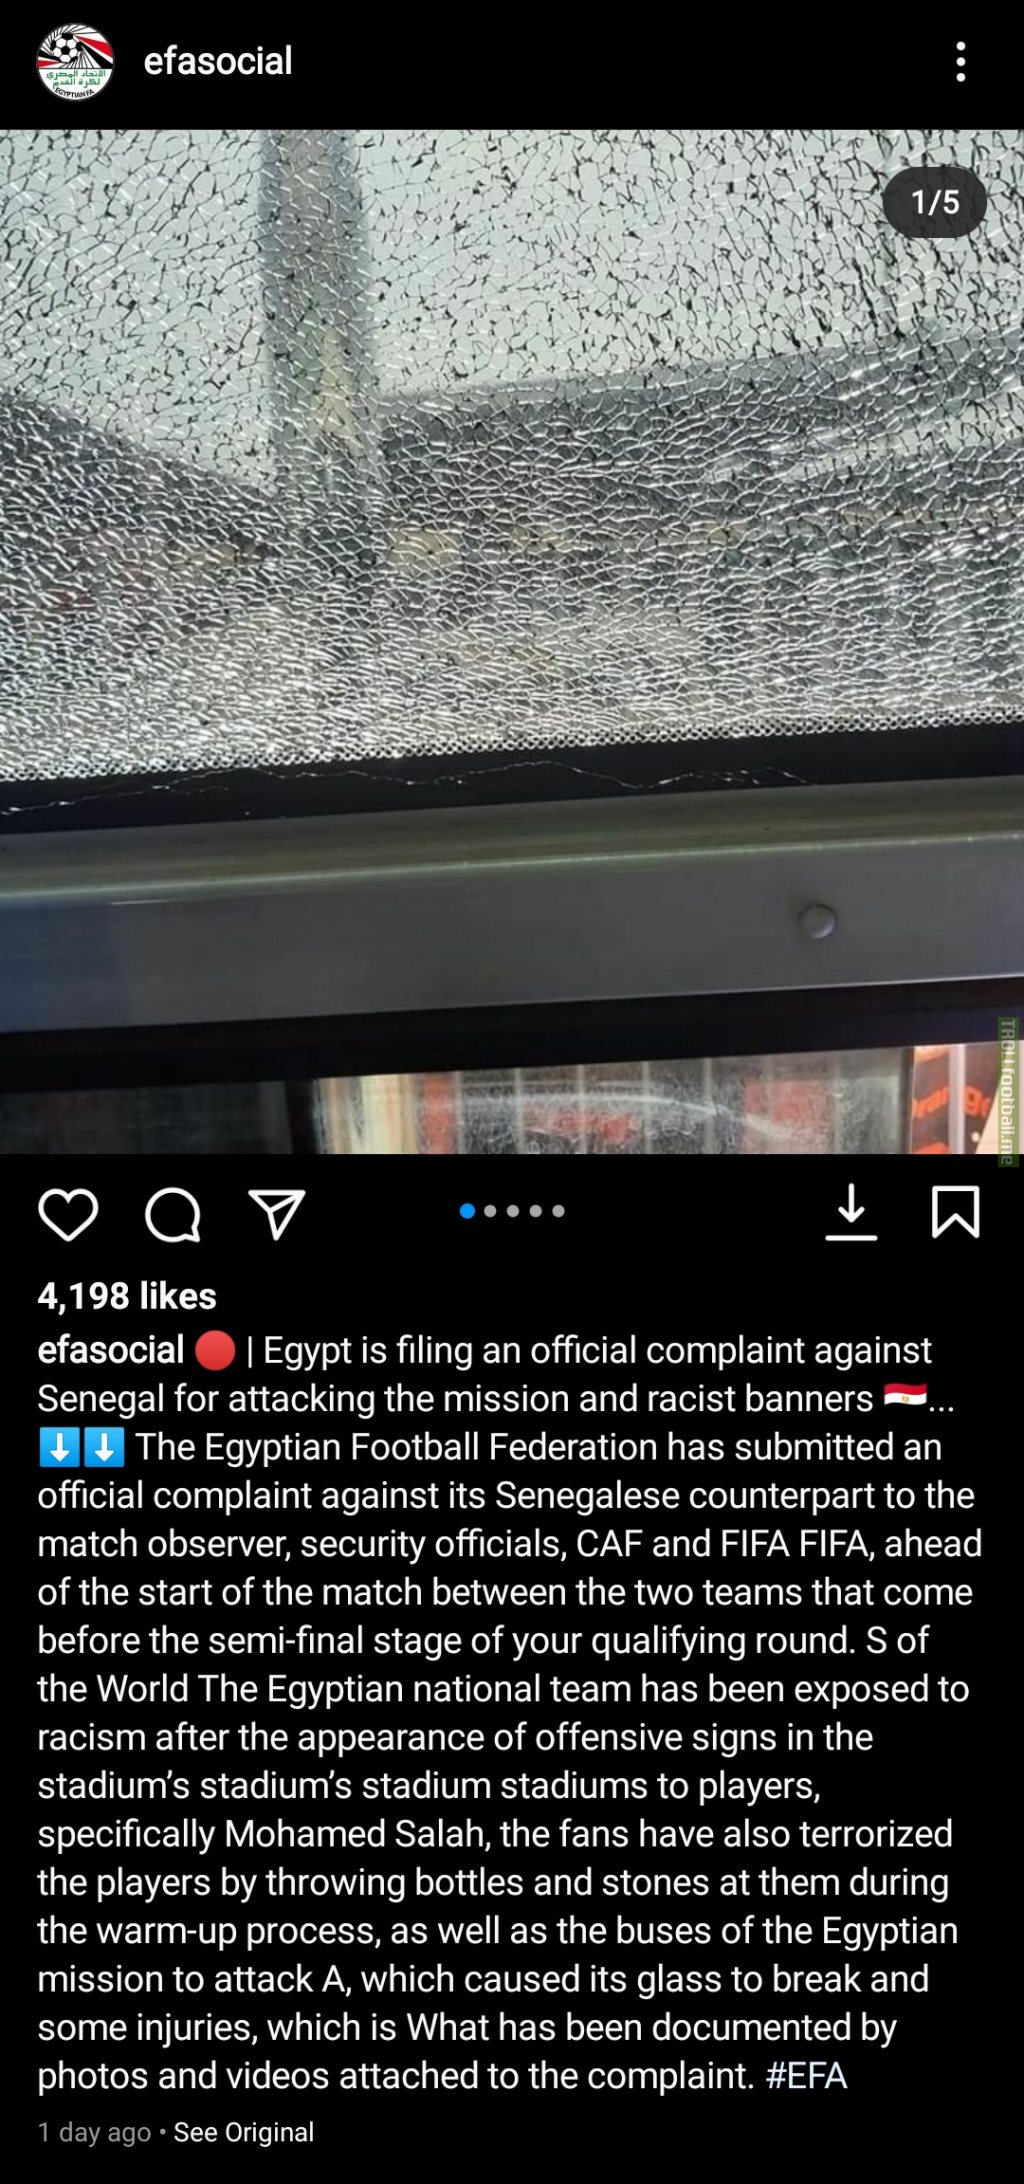 Egypt files complaint to CAF and FIFA regarding the use of lasers, projectiles and racist banners by Senegalese fans.